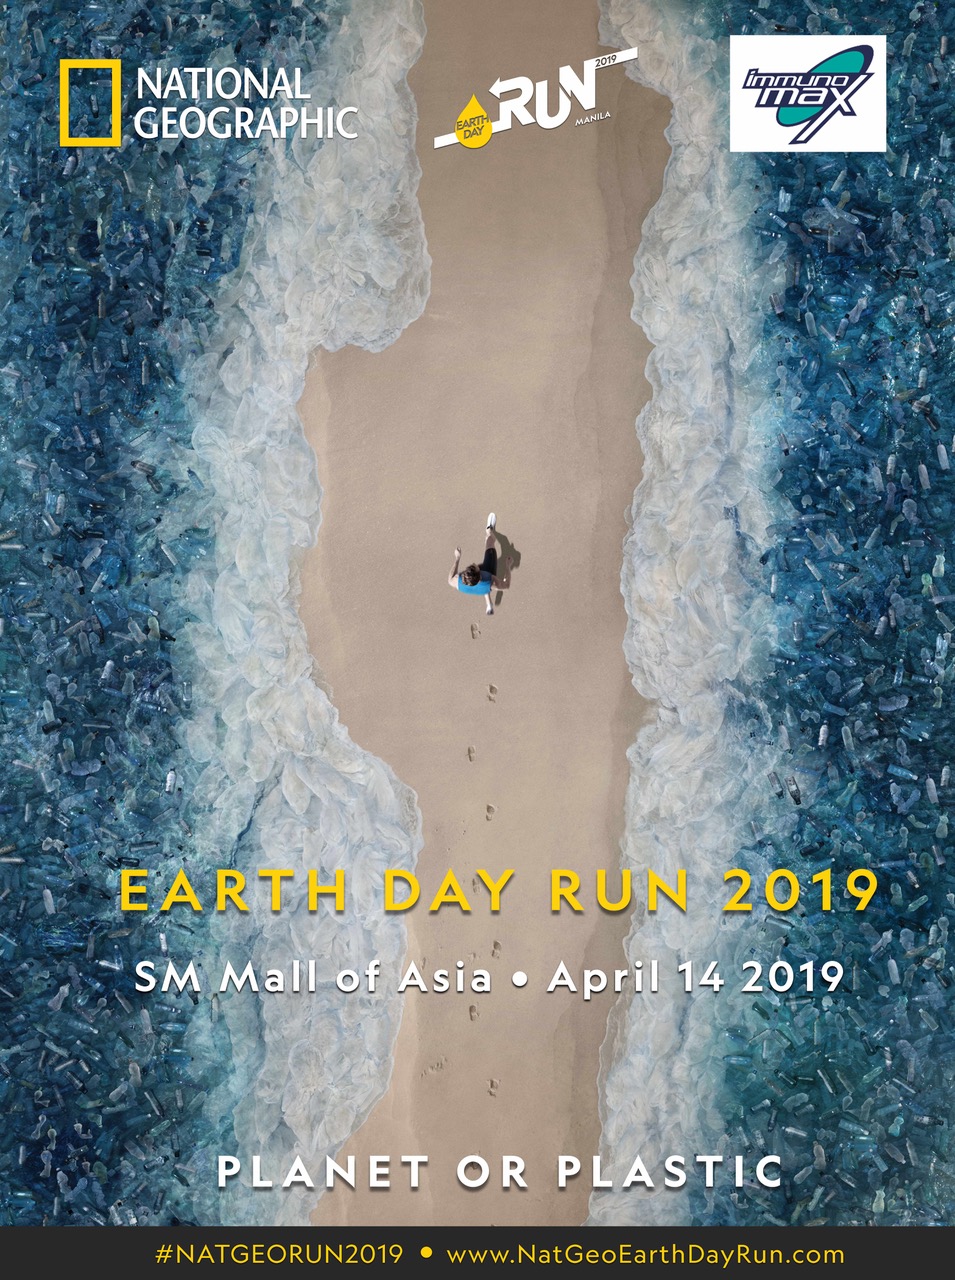 EARTH DAY RUN 2019 OFFICIAL PHOTO